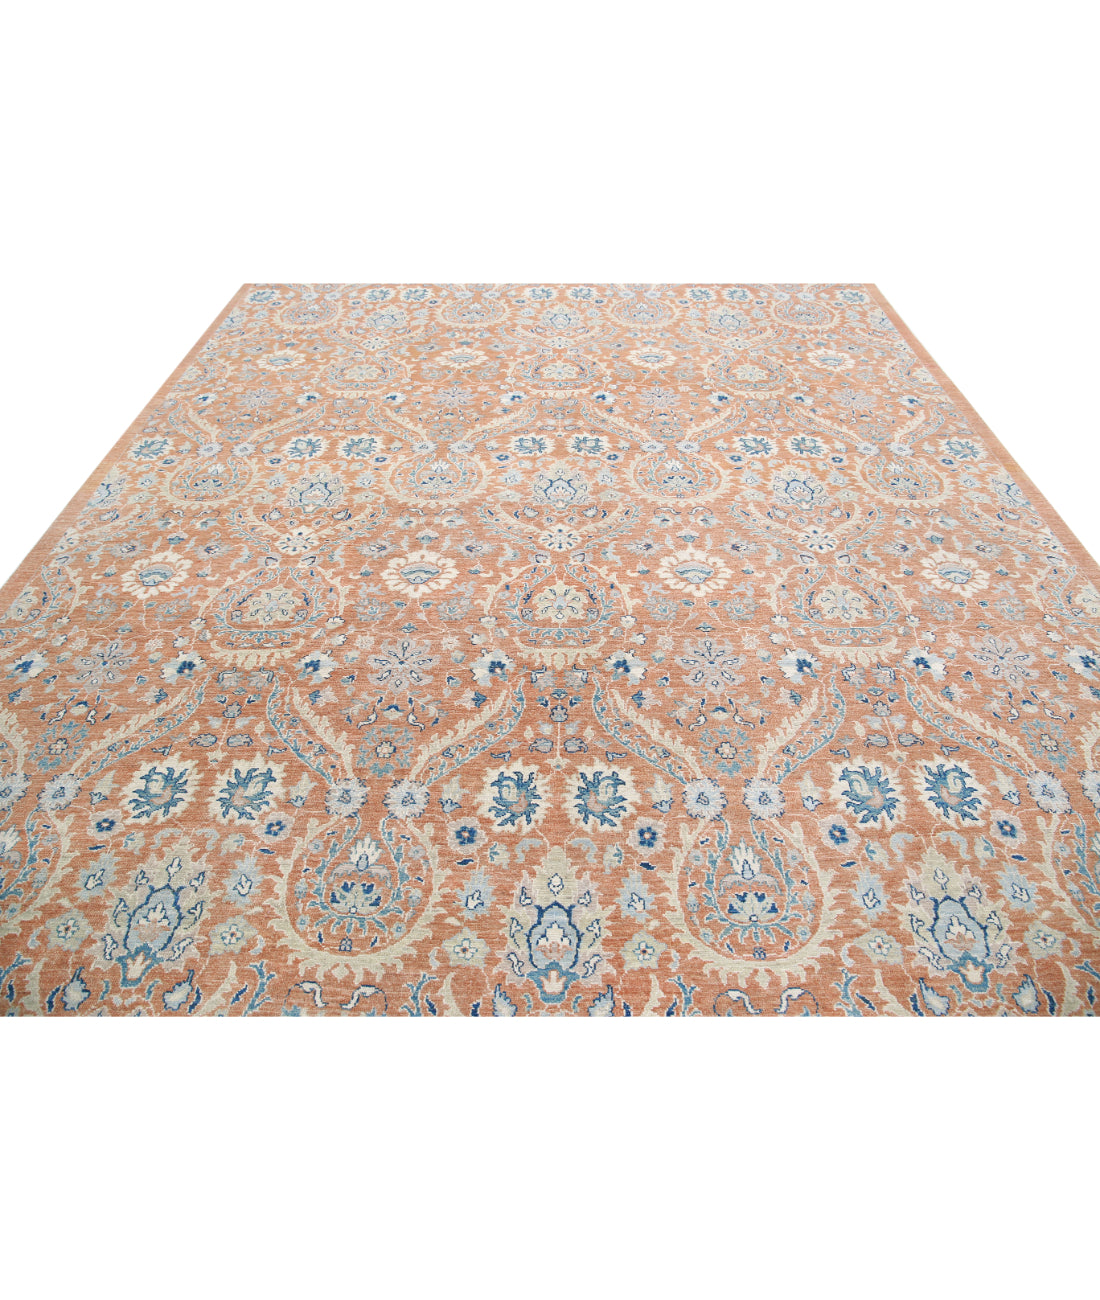 Hand Knotted Art & Craft Wool Rug - 9'10'' x 13'6'' 9'10'' x 13'6'' (295 X 405) / Brown / Blue